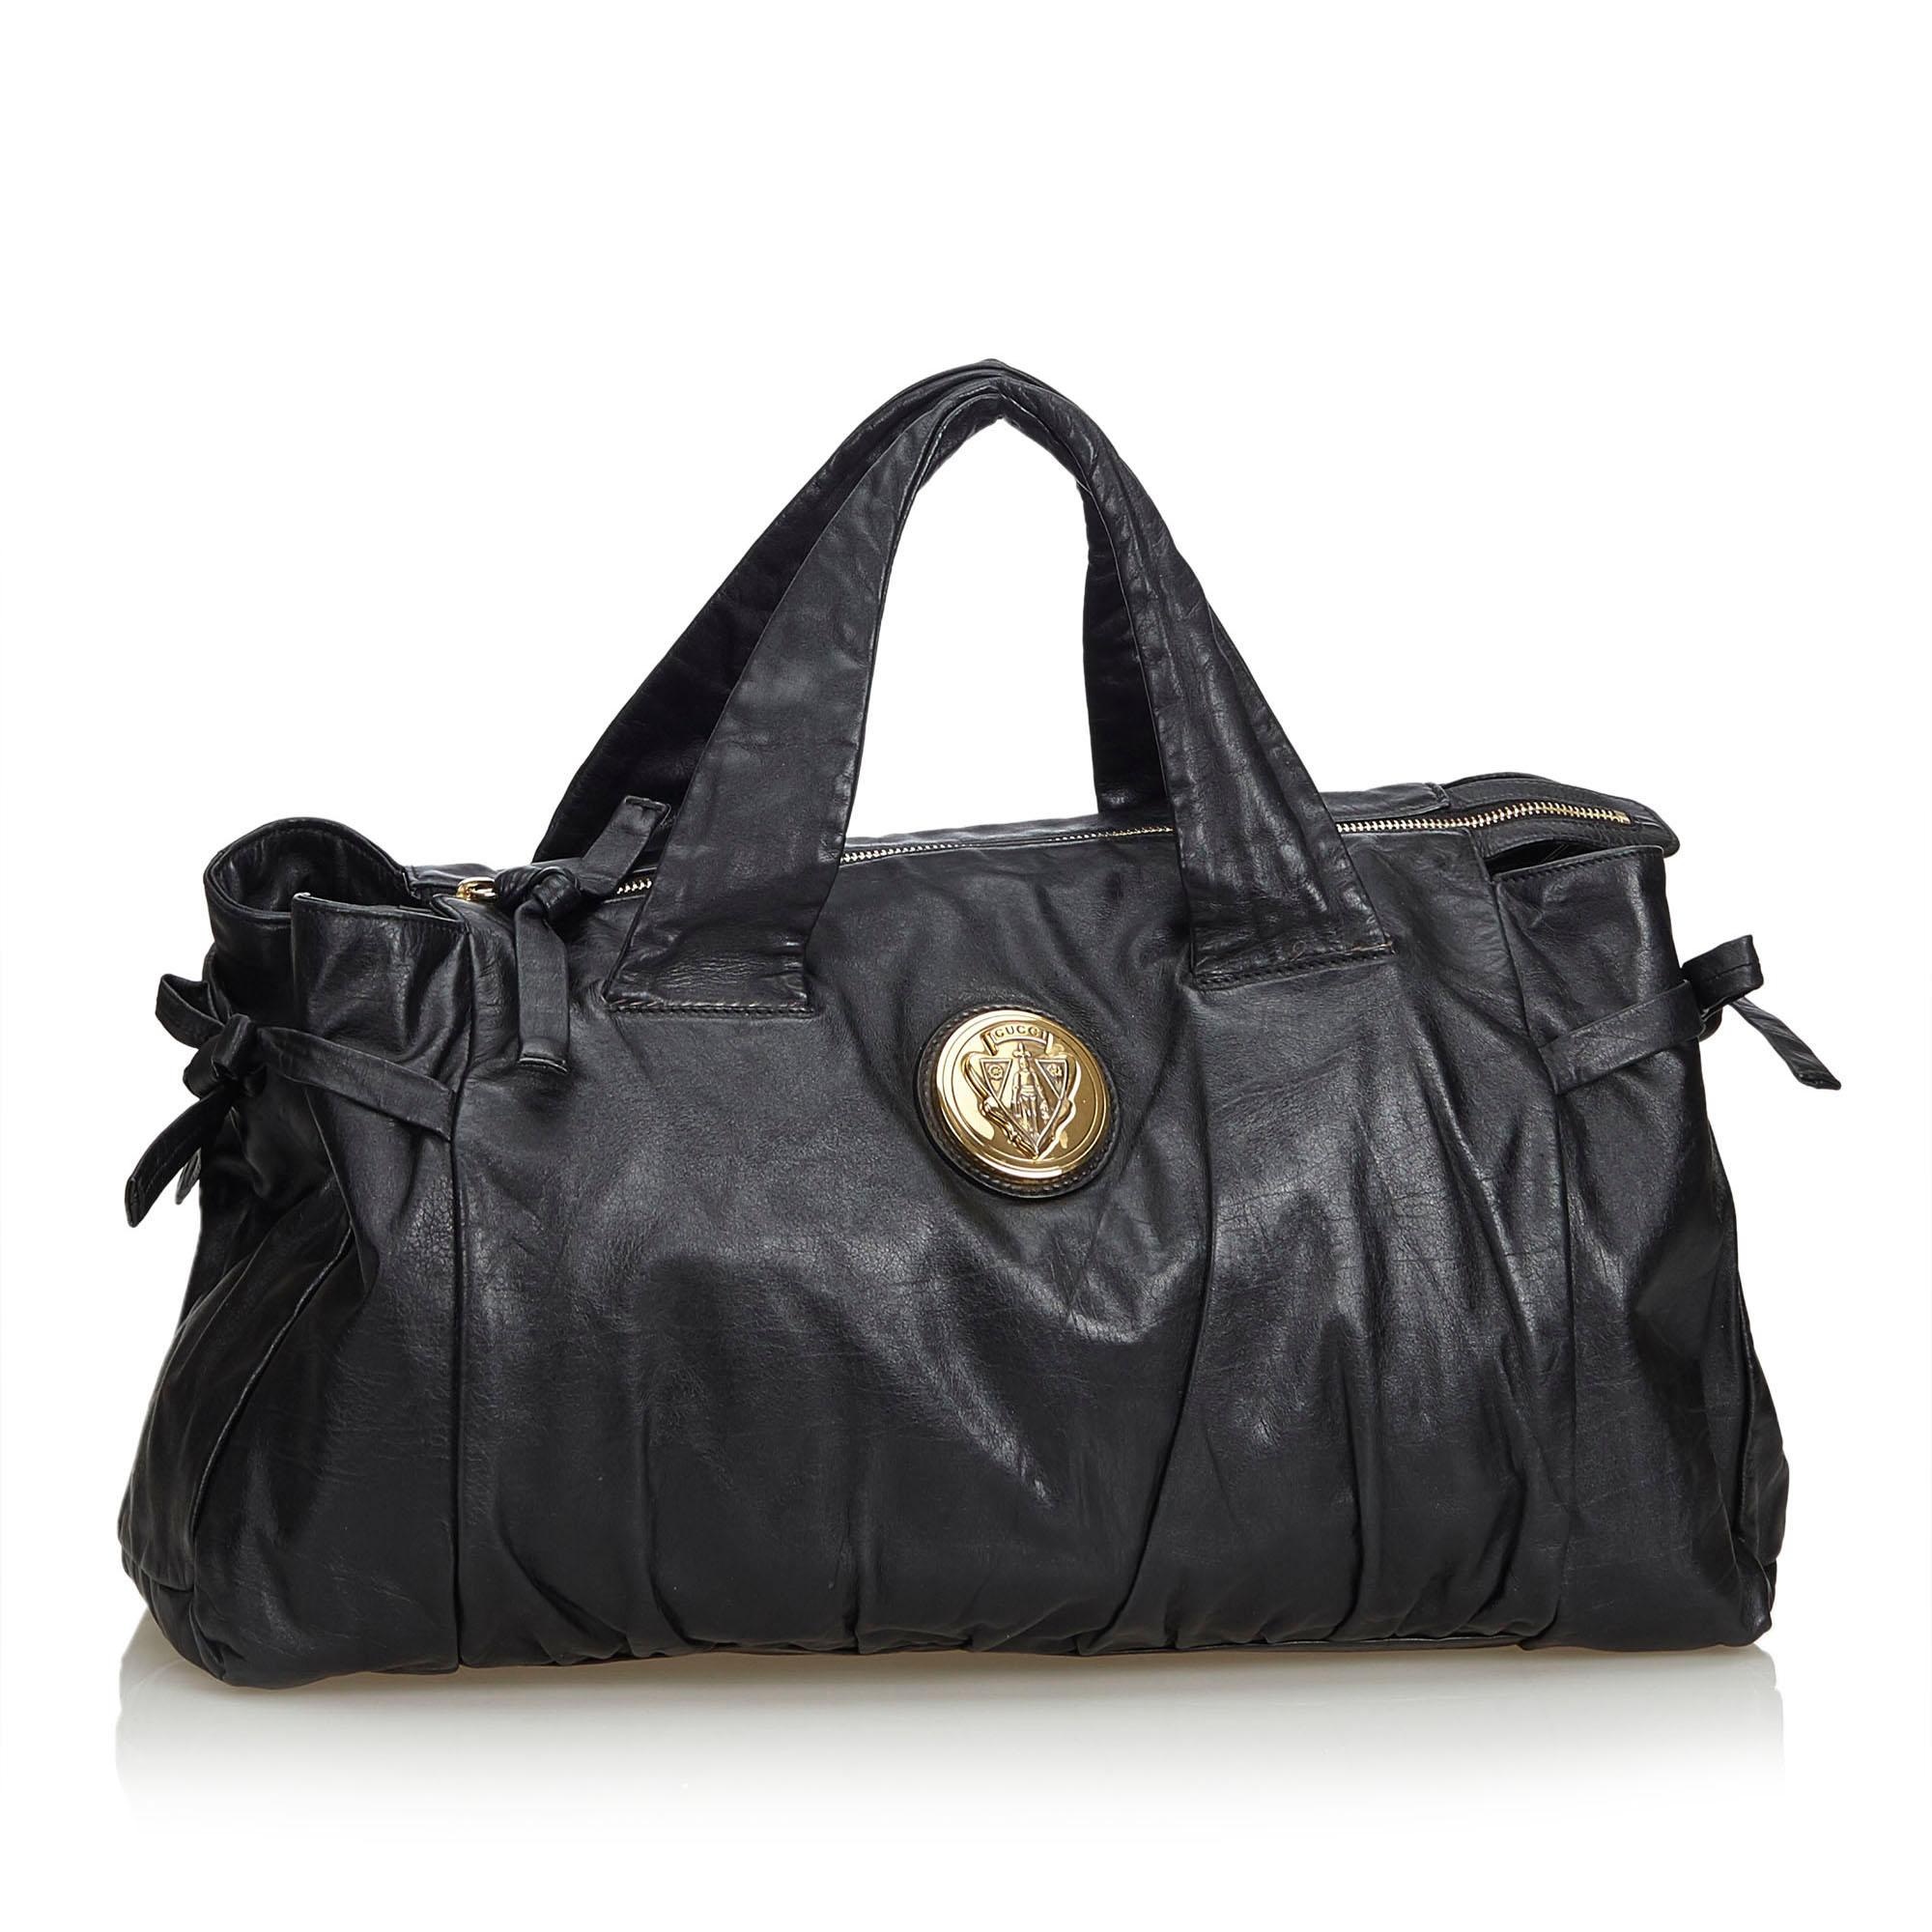 The Hysteria features a leather body, leather handles, gold-tone hardware, a top zip closure, and an interior zip pocket. It carries as B+ condition rating.

Inclusions: 
This item does not come with inclusions.

Dimensions:
Length: 24.00 cm
Width: